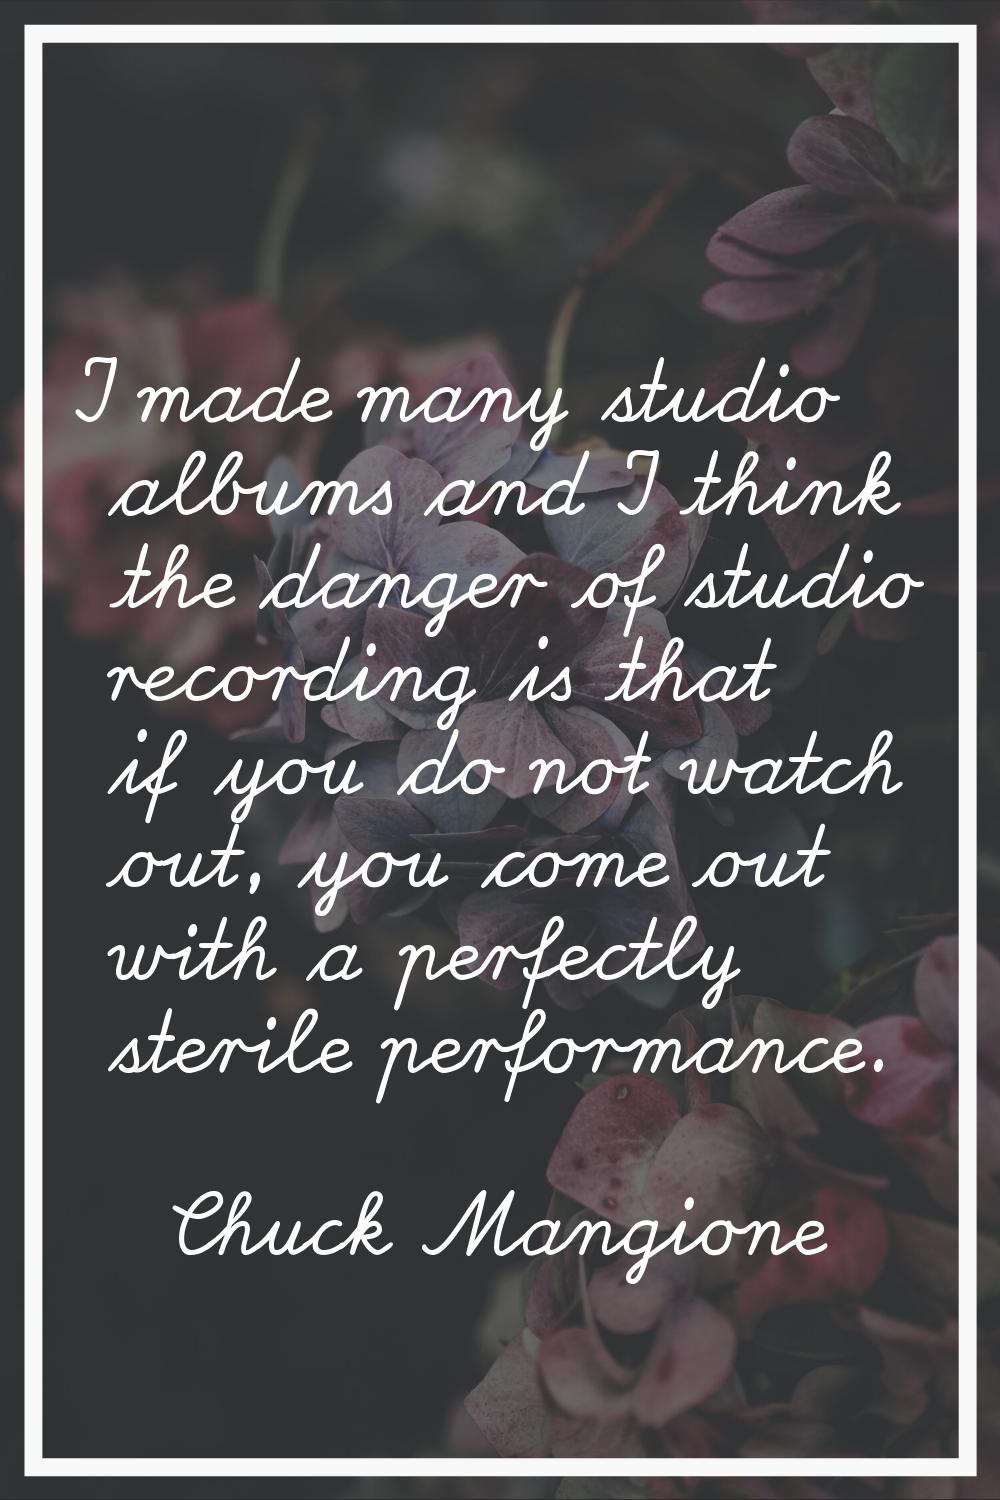 I made many studio albums and I think the danger of studio recording is that if you do not watch ou